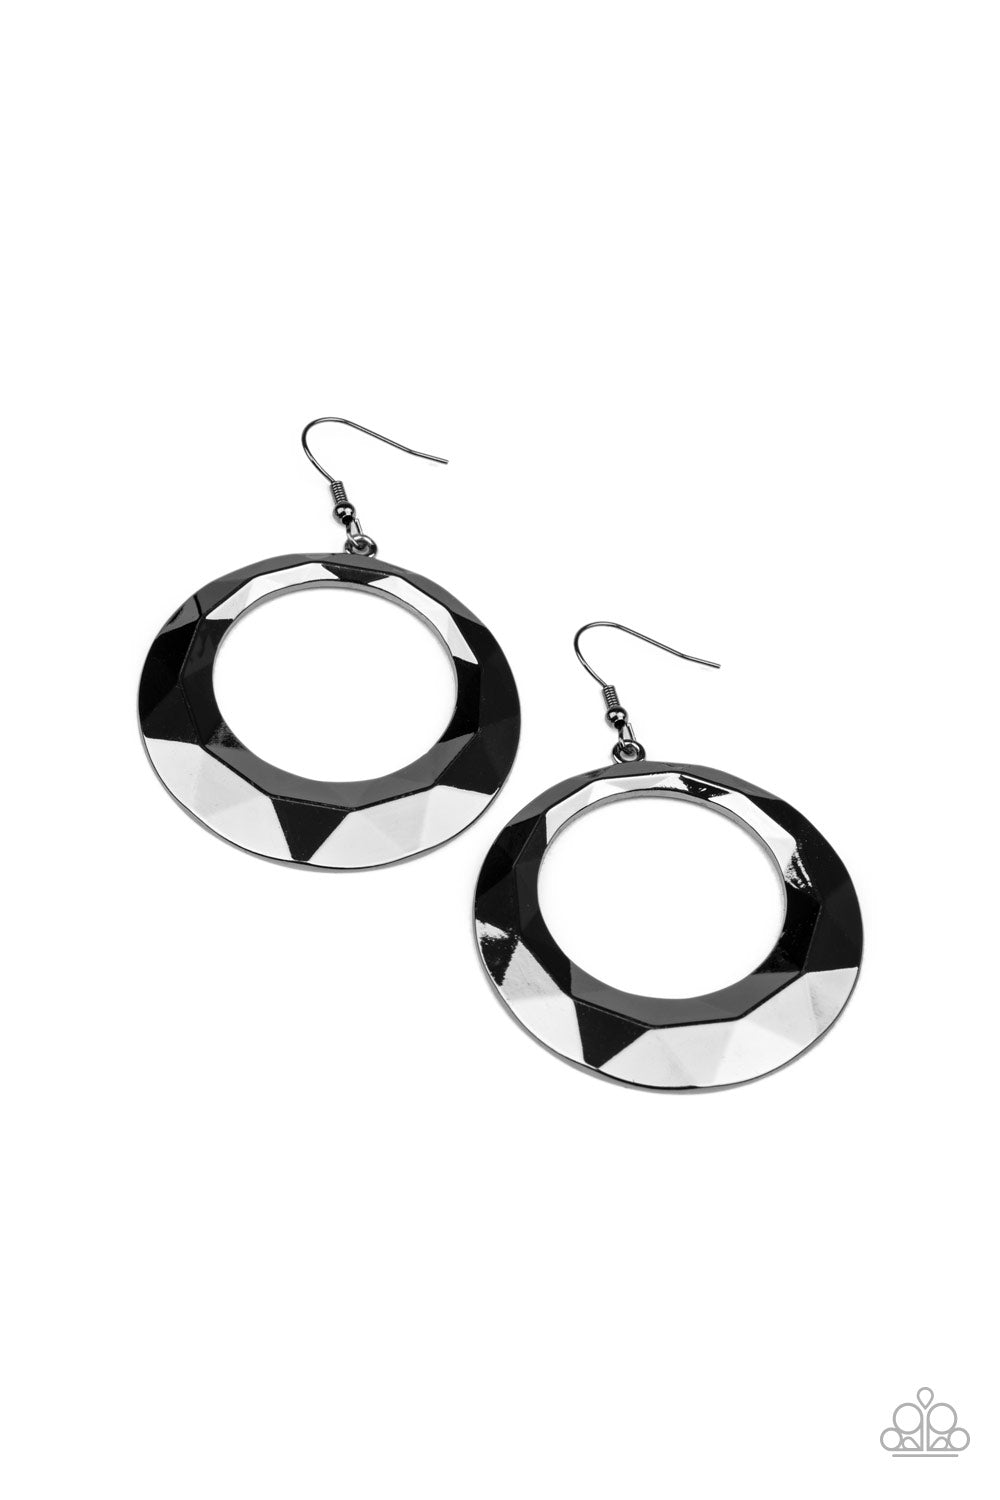 Paparazzi Fiercely Faceted - Black Earrings - A Finishing Touch 